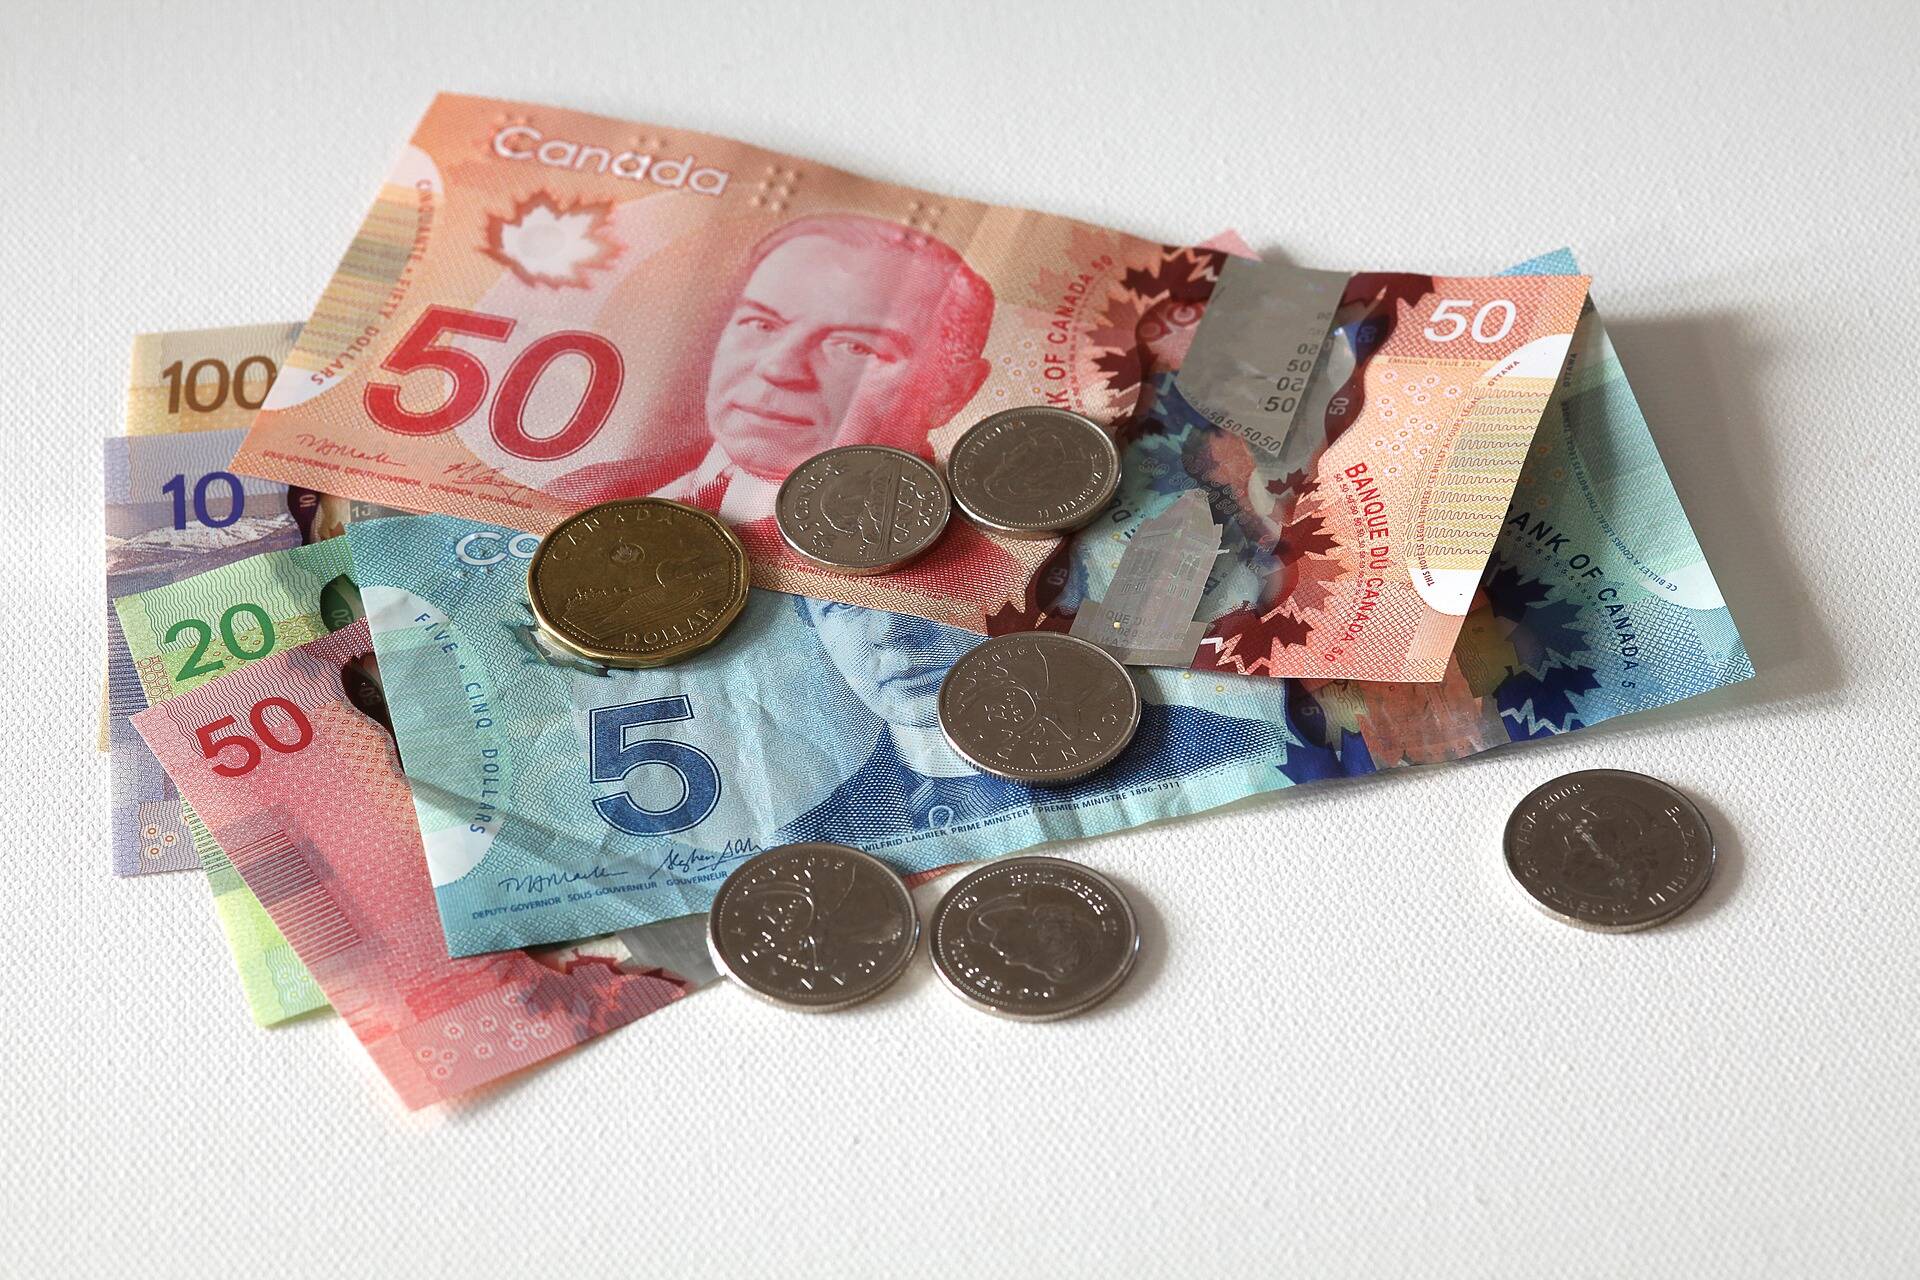 B.C.’s minimum wage is going up on June 1 by 65 cents to $17.40 per hour, but a new report from Canadian Centre for Policy Alternatives, British Columbia, and Living Wage for Families BC, says the increase will still hundreds of thousands below the living wage for their community. (Black Press Media file photo)